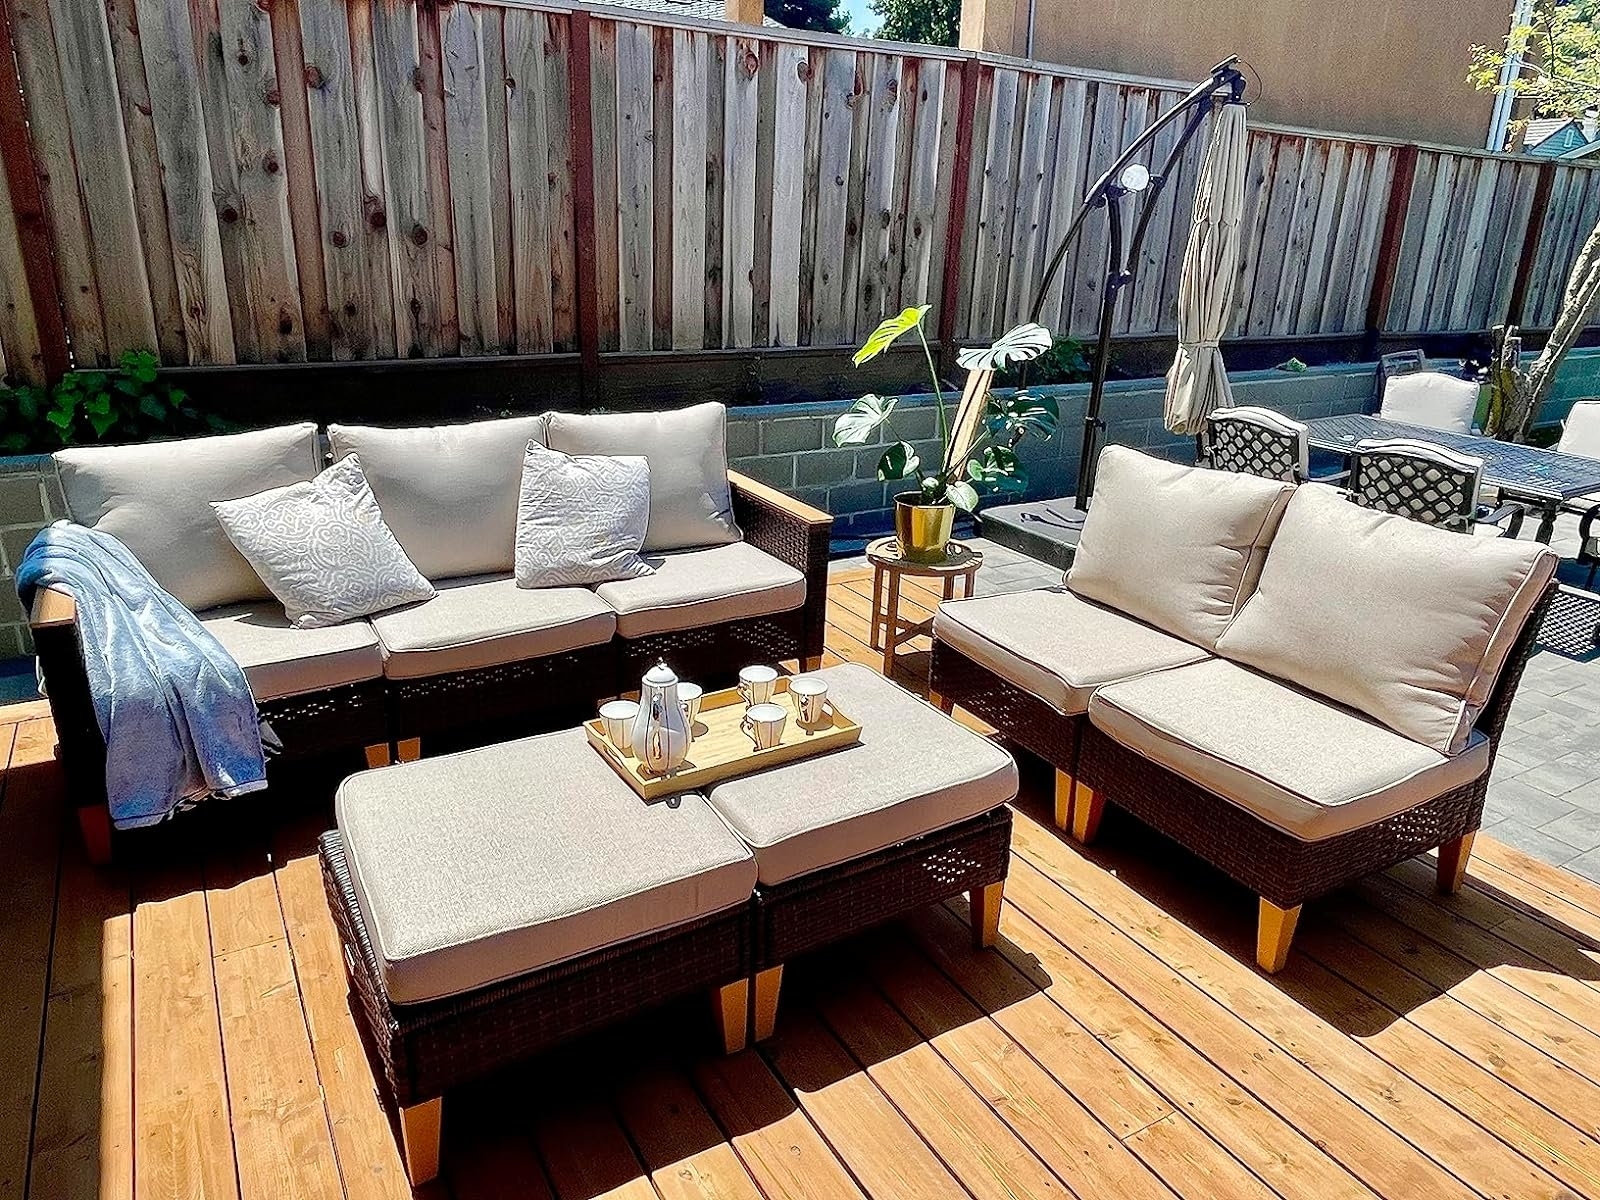 37 Ways To Make Your Backyard Look Like An “After” Shot On HGTV